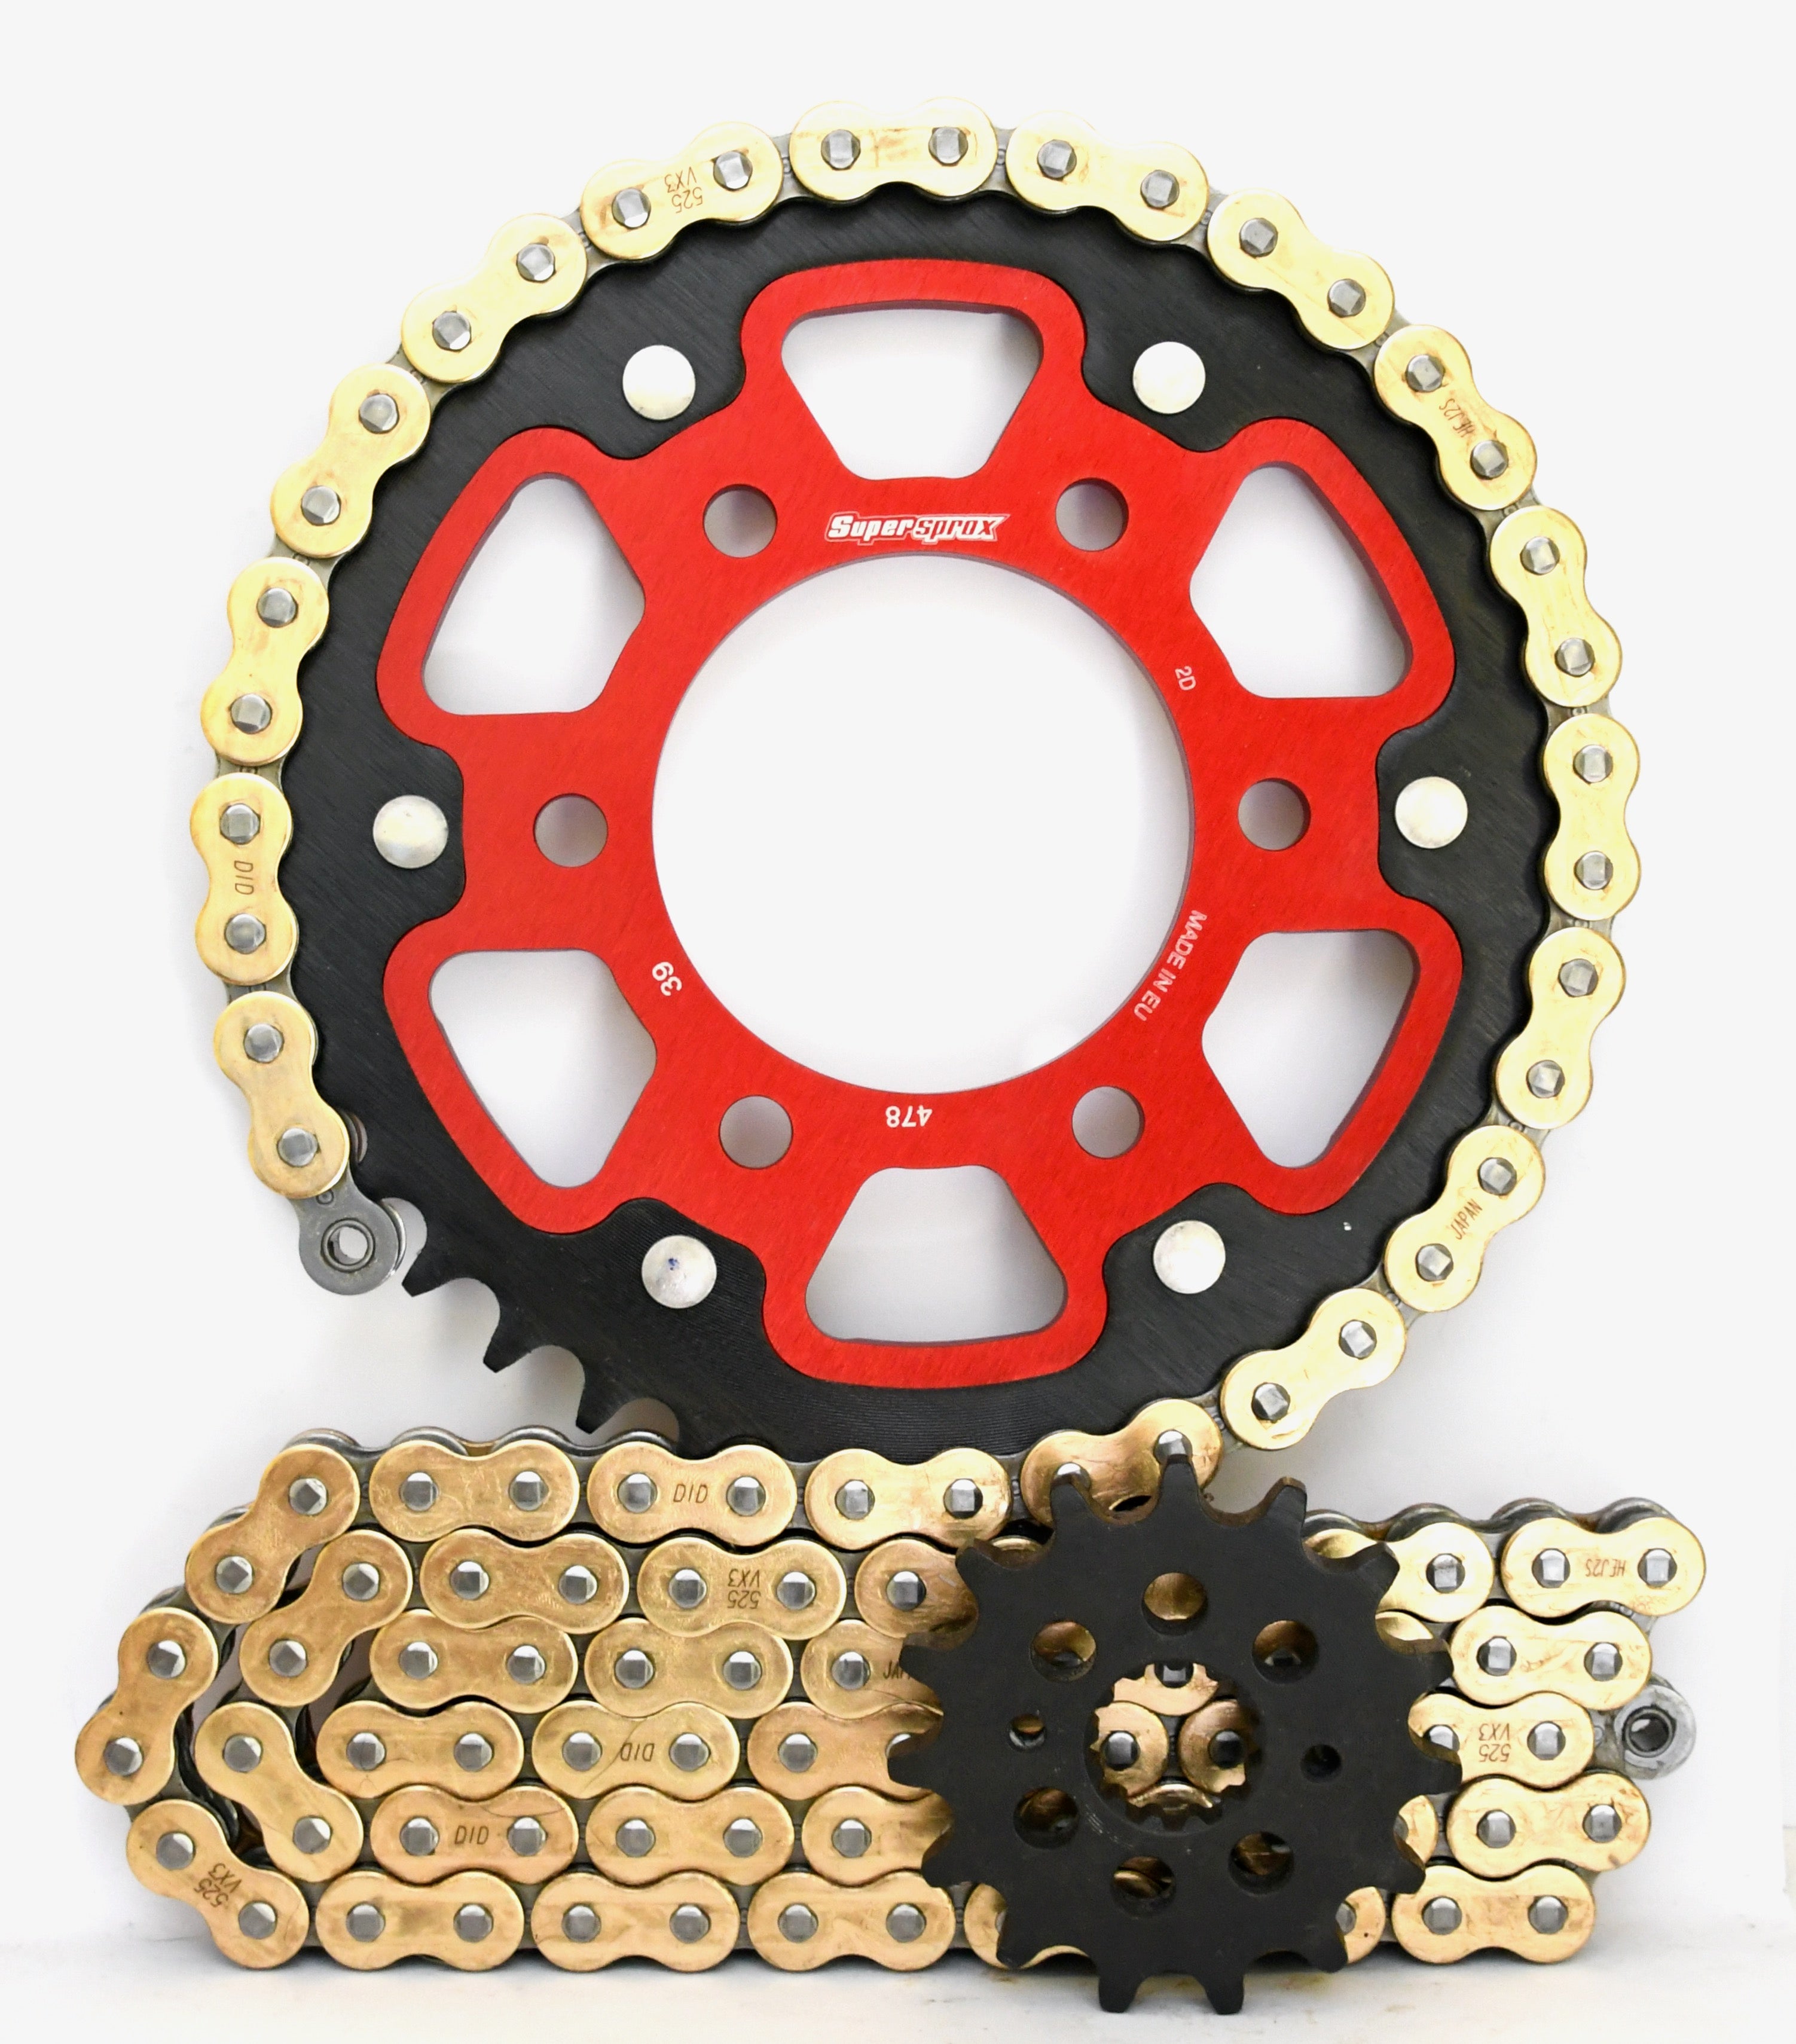 Supersprox Stealth and DID 520 Conversion Chain & Sprocket Kit for Kawasaki ZX-10R 2004-2005 - Standard Gearing